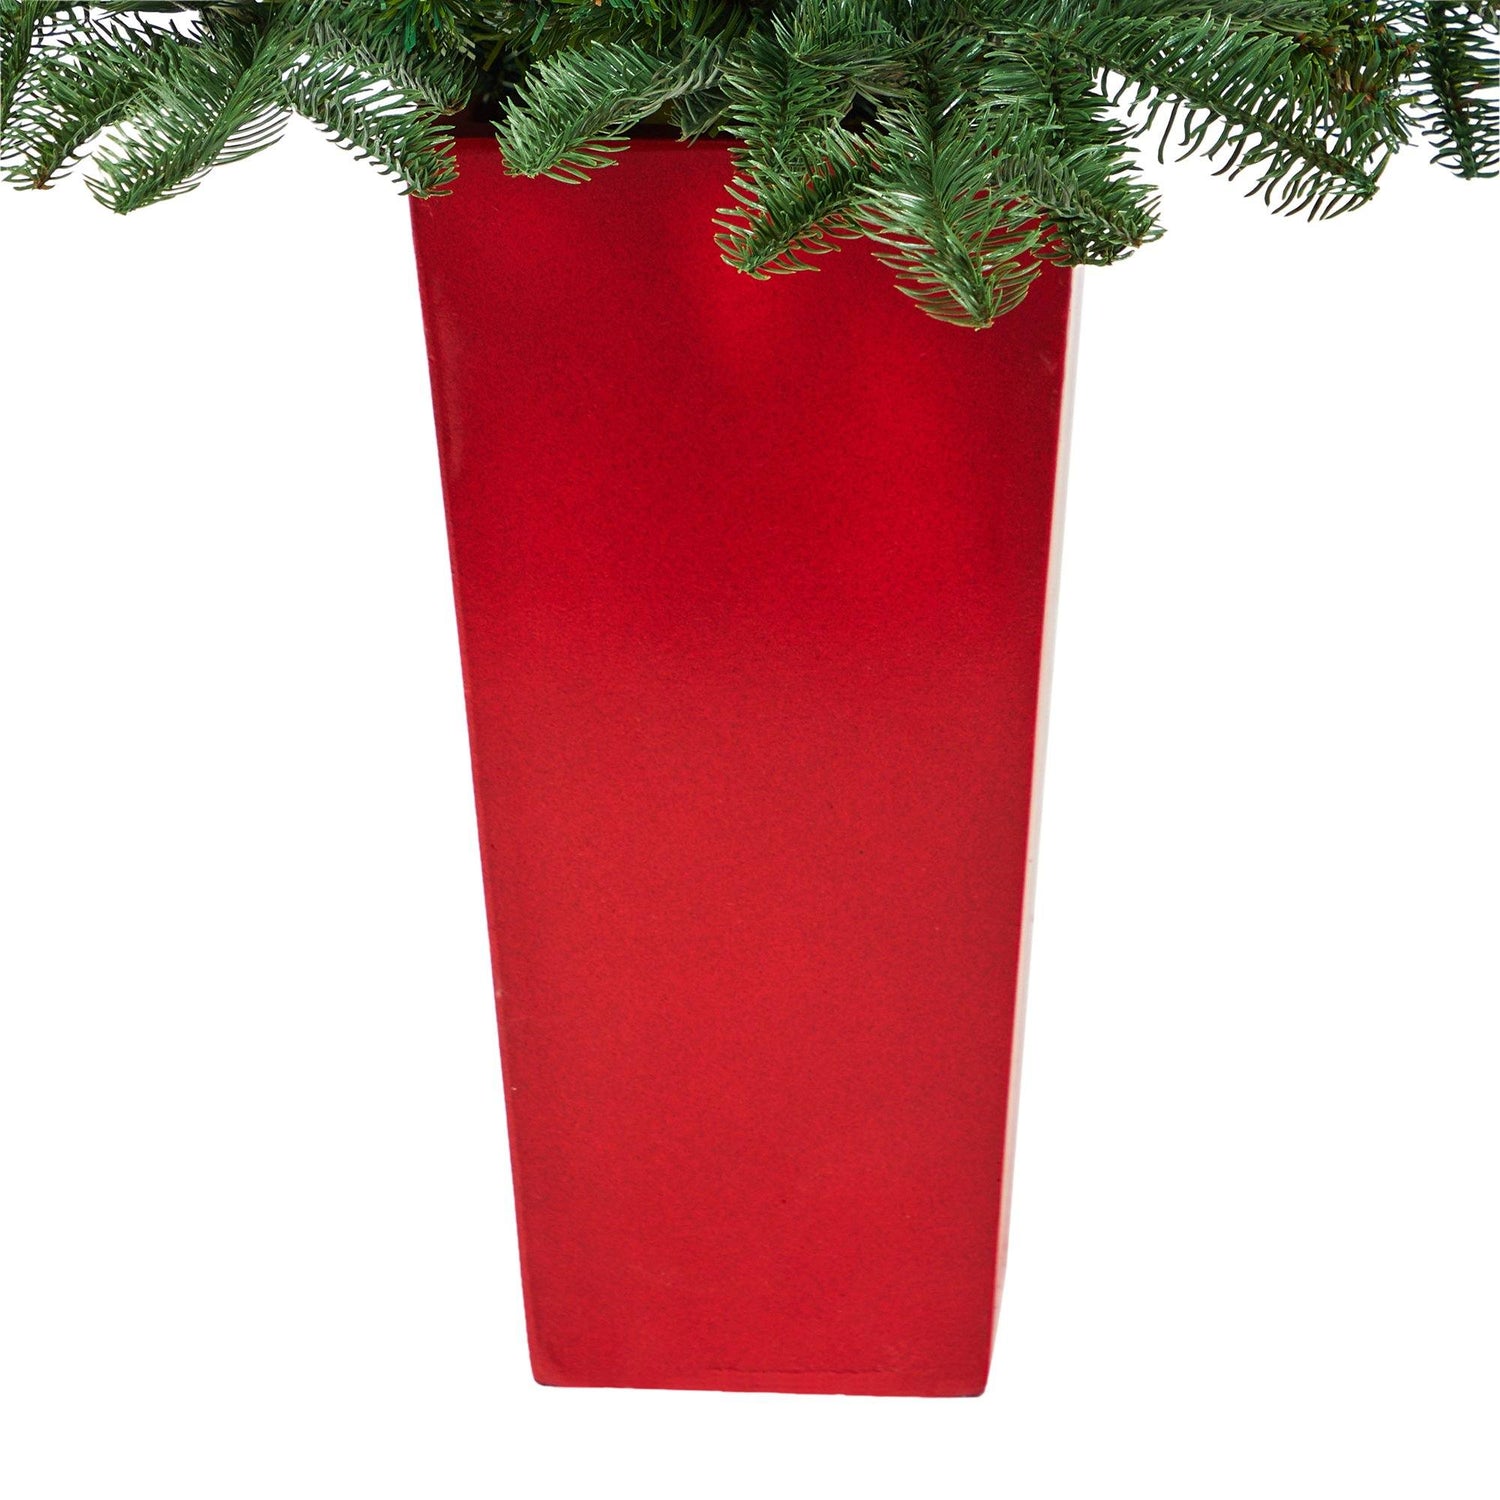 3.5’ South Carolina Spruce Artificial Christmas Tree with 458 Bendable Branches in Red Tower Planter